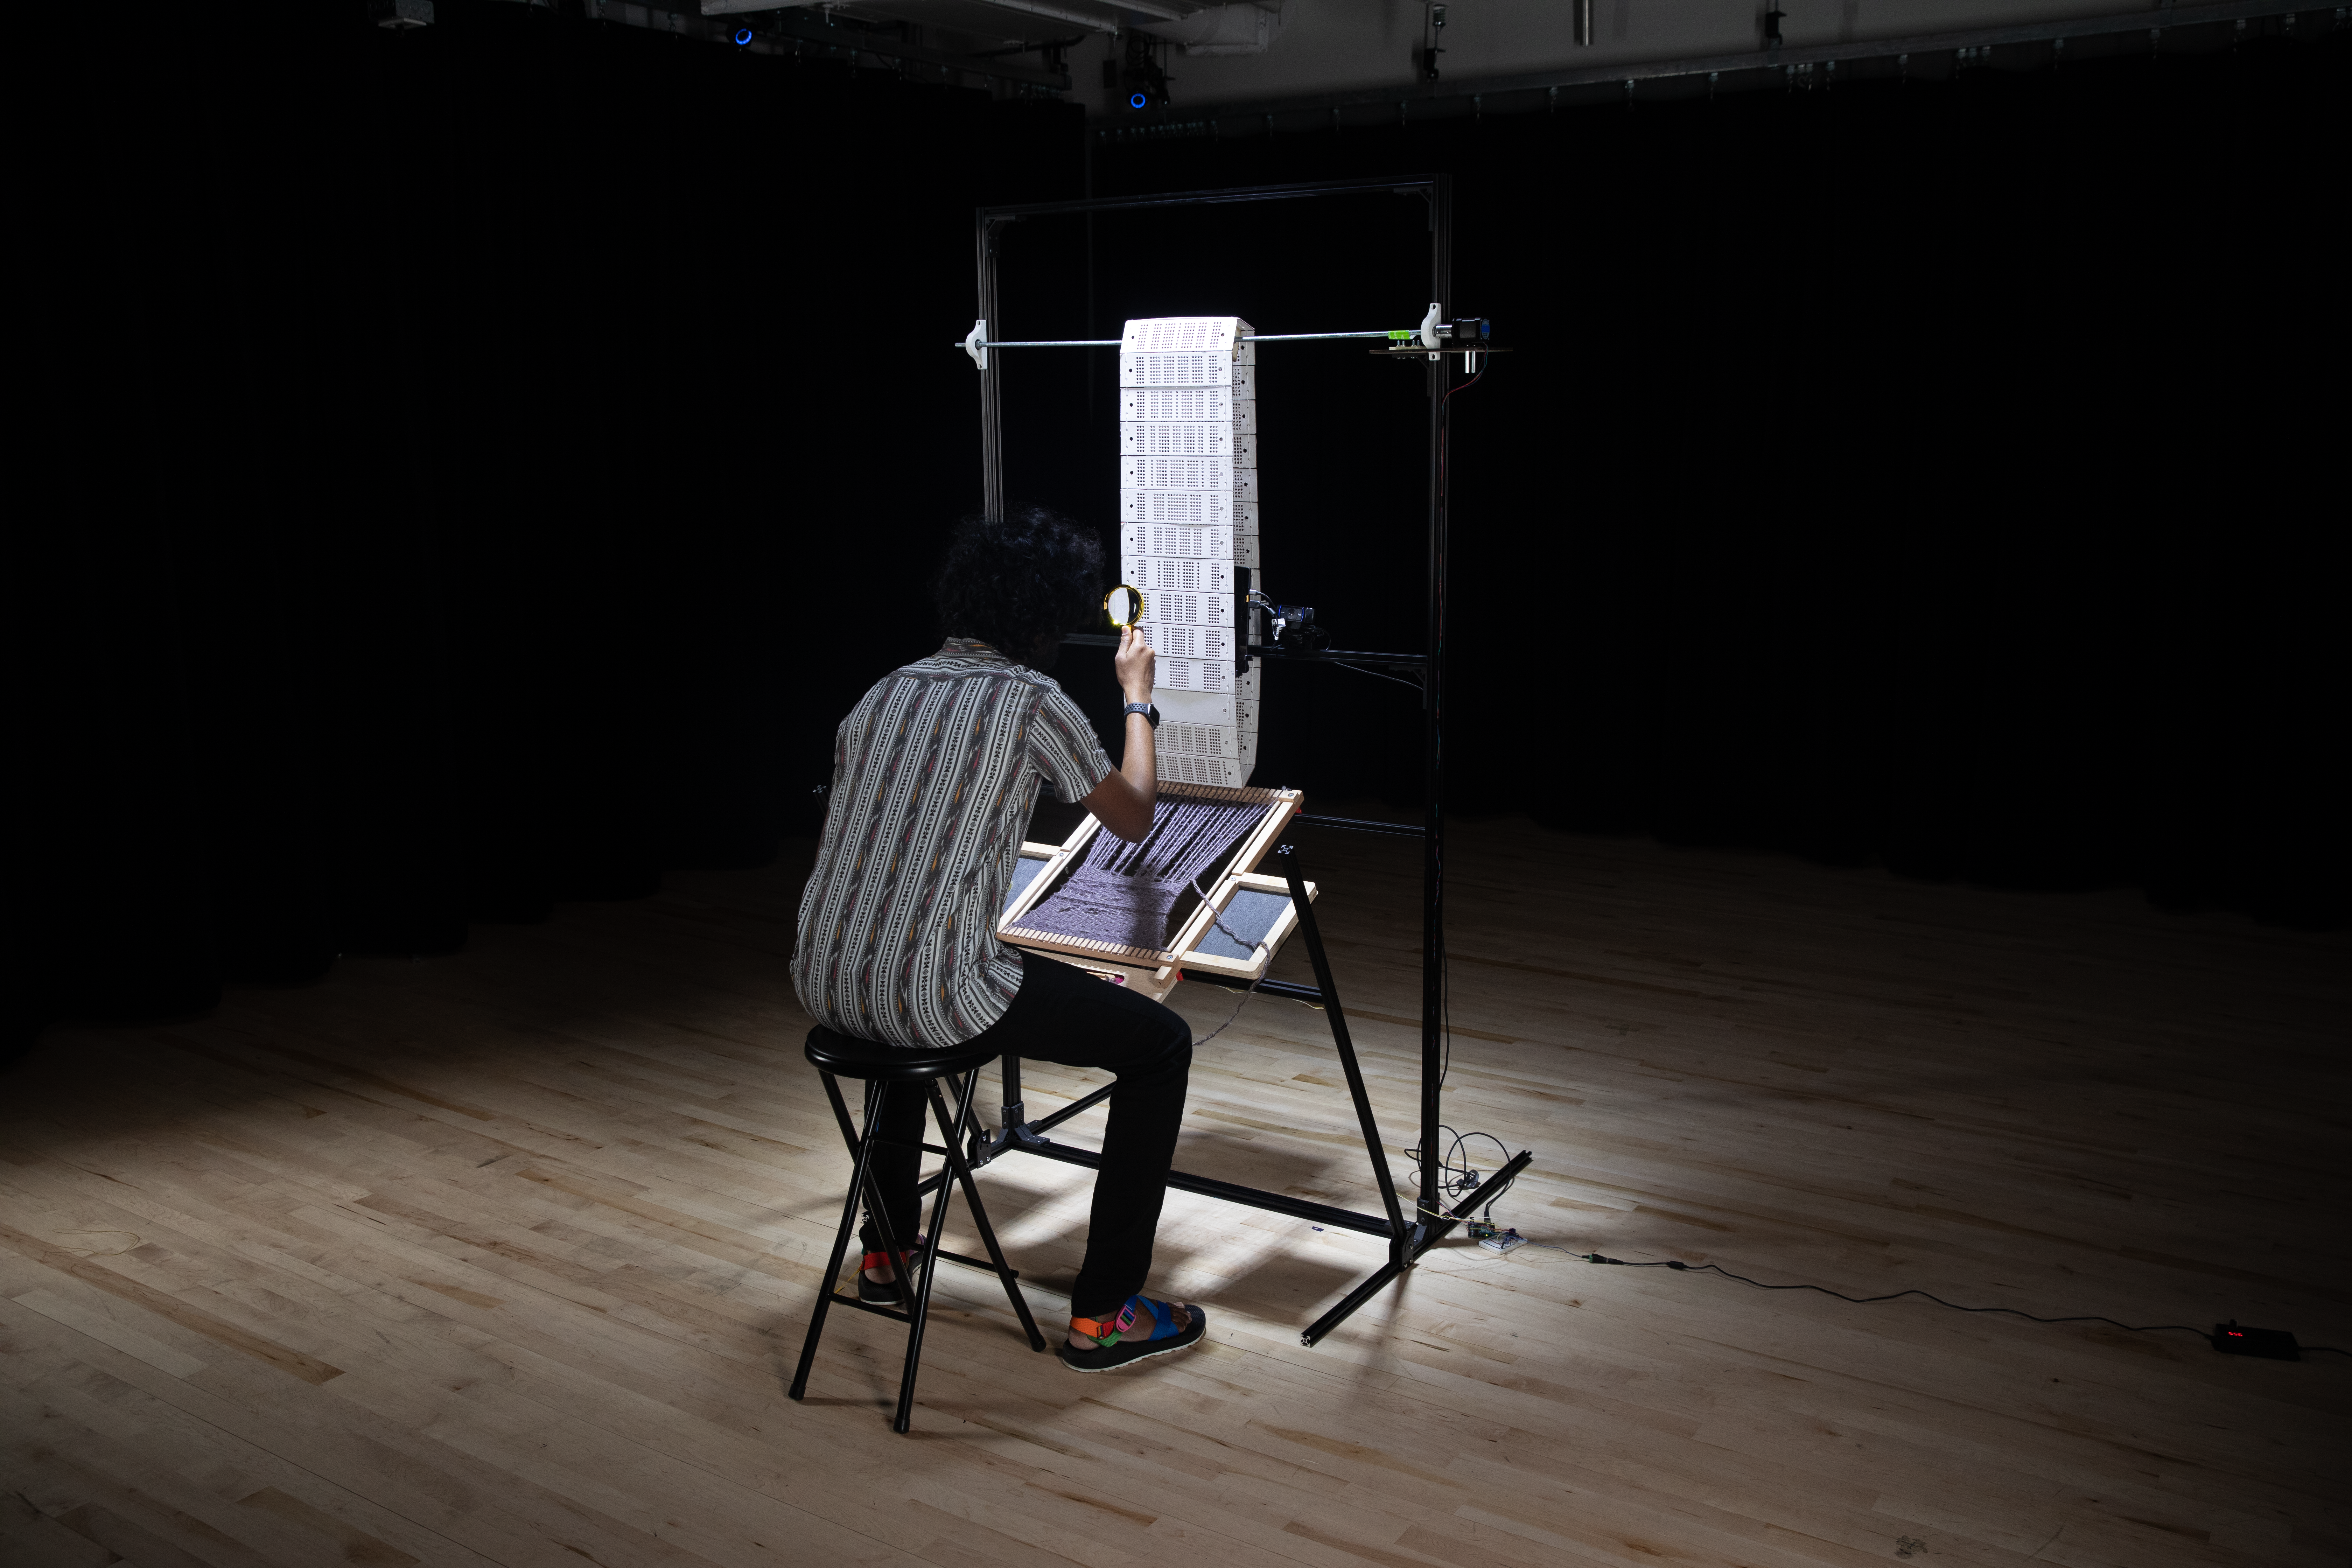 The installation with a participant sitting on the stool in front of it and looking at the faces through the cards using a magnifying glass.